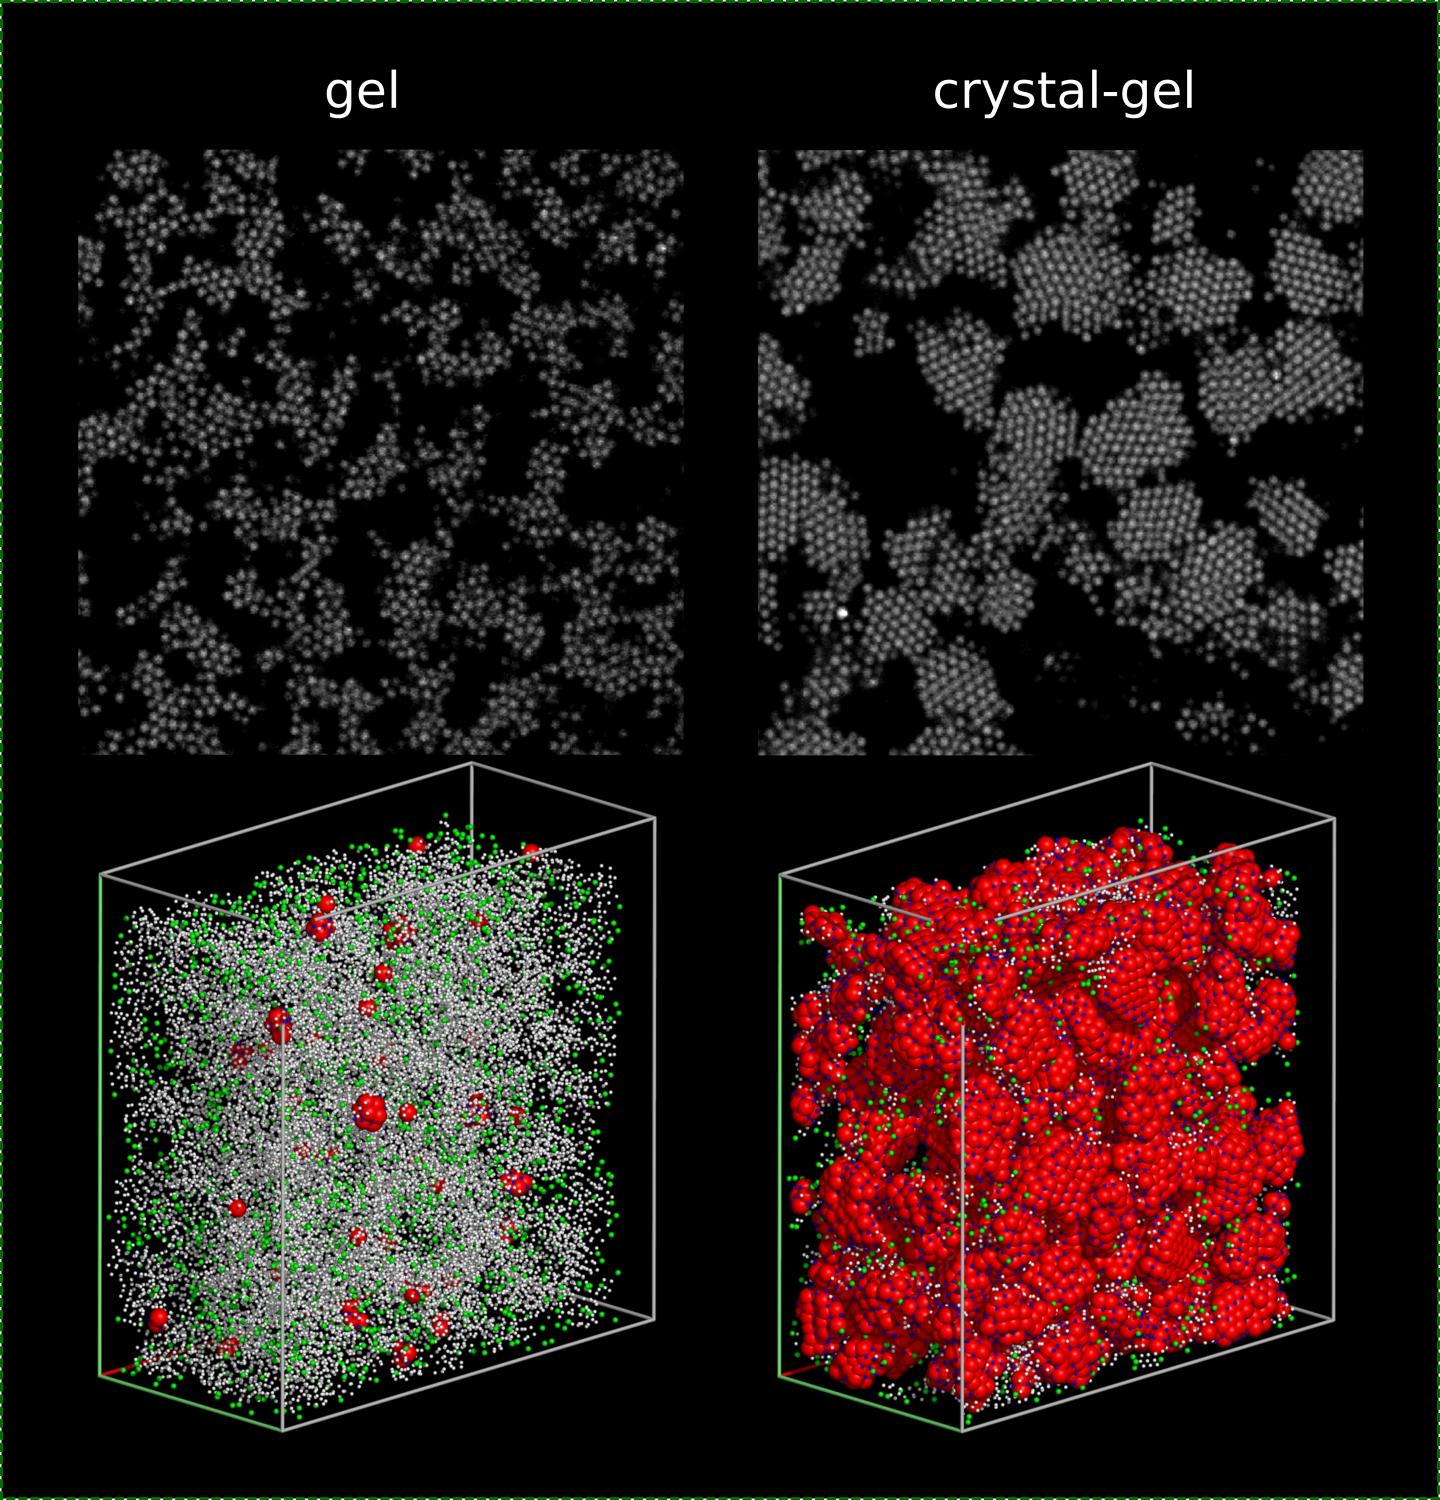 Comparison Between a Regular Colloidal Gel (Left Column) and the New Crystal-Gel Structure (Right Co